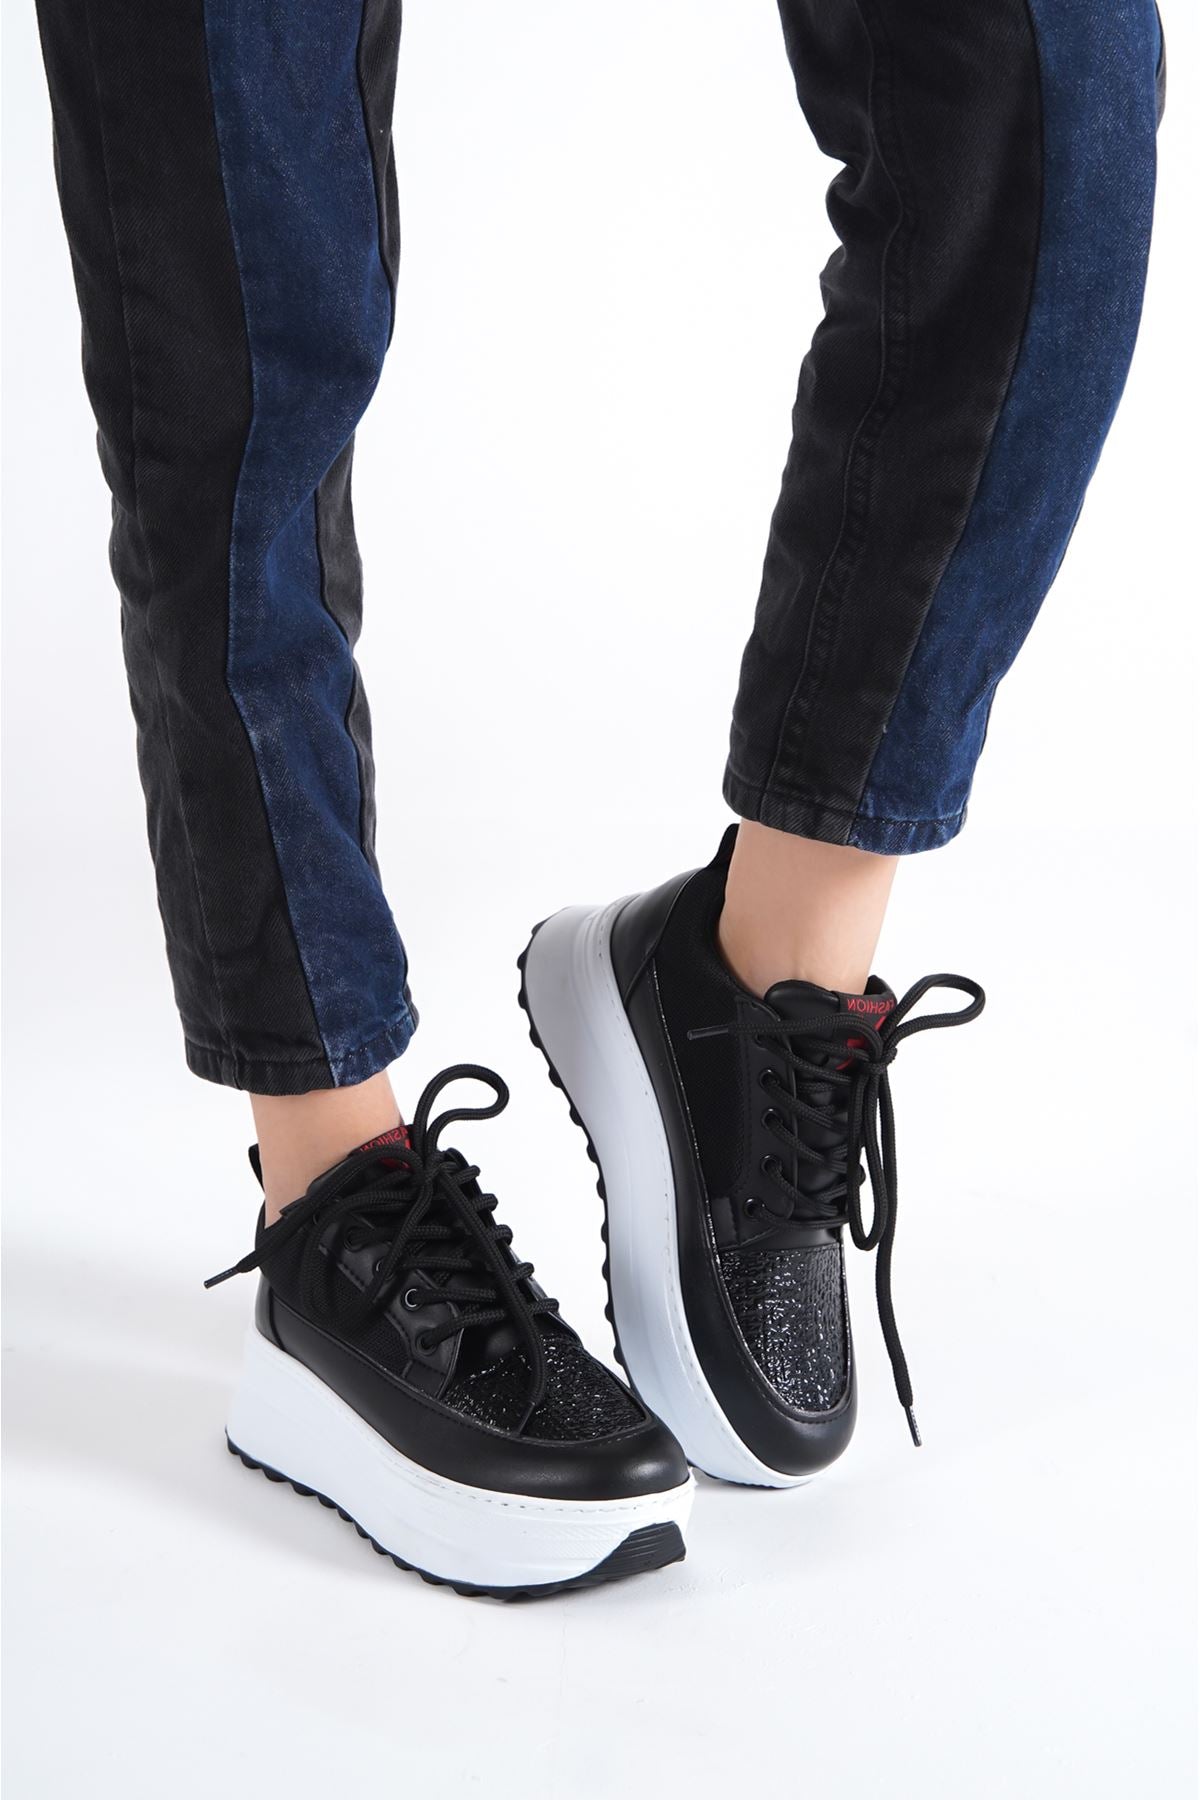 Oneo Black White Women's Sneakers Shoes - STREET MODE ™